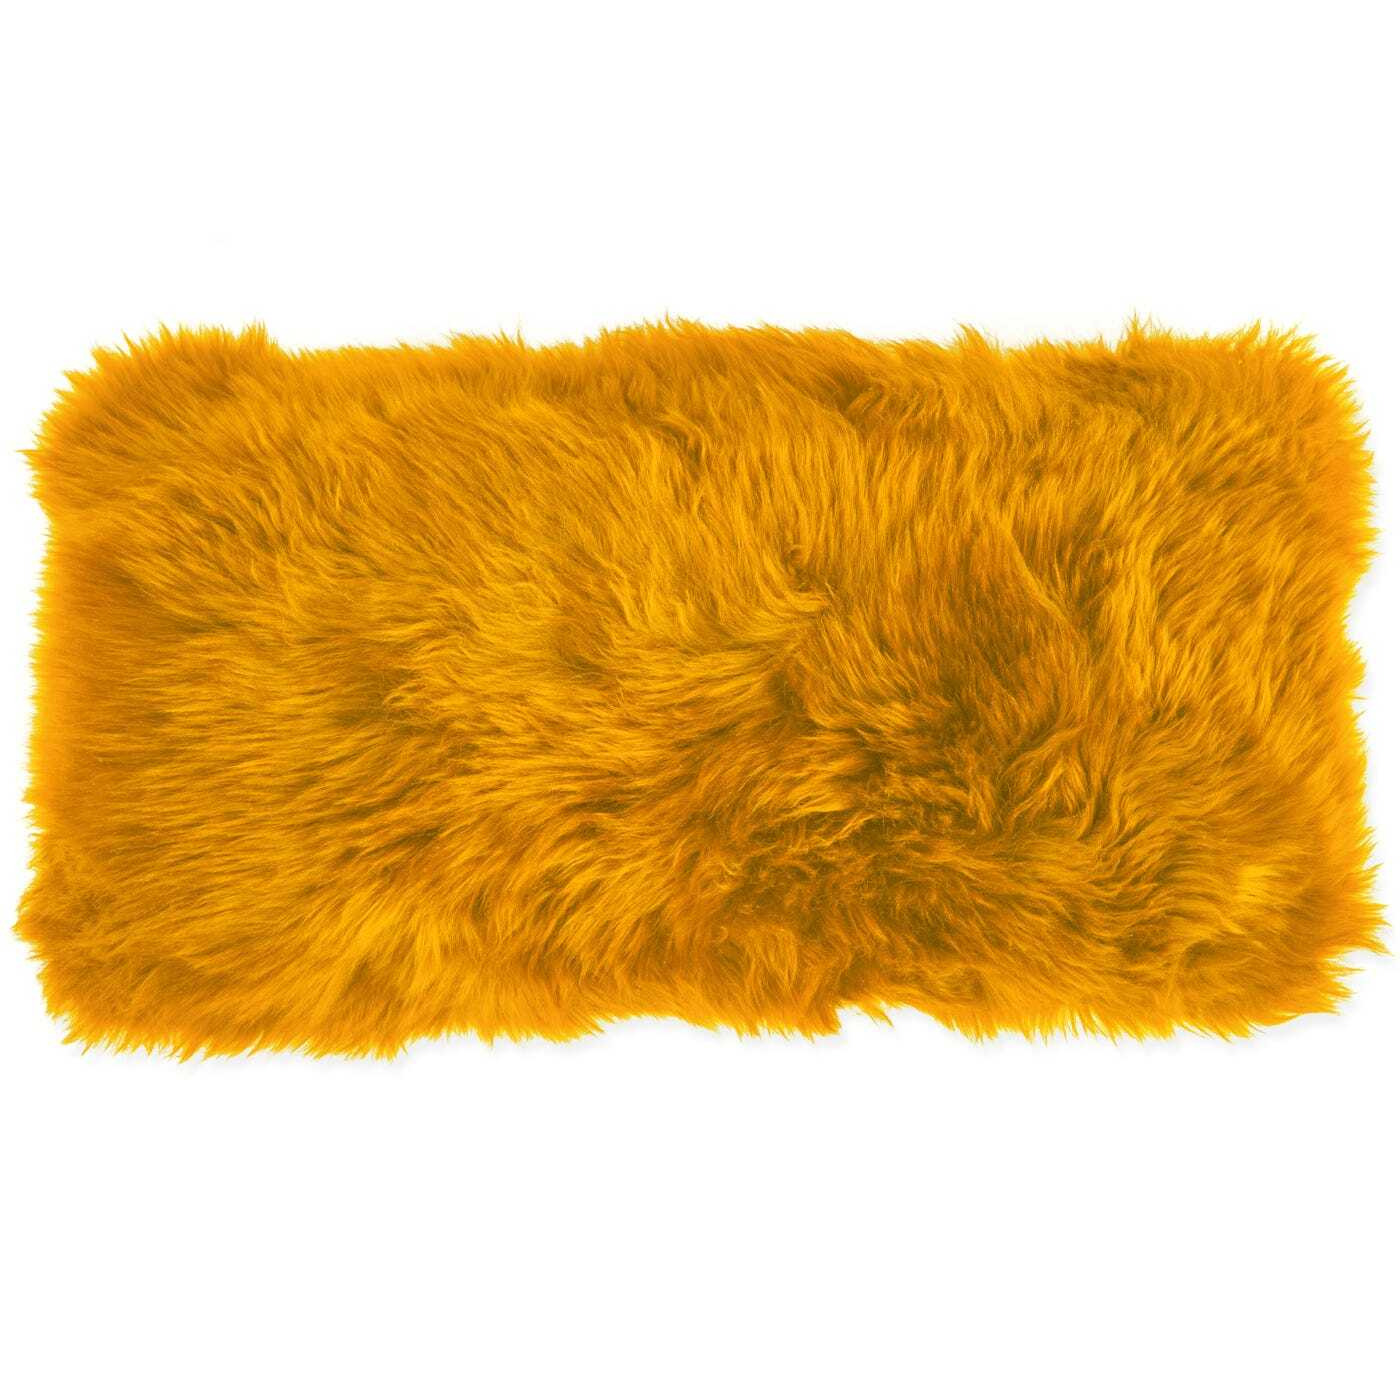 Natures Collection New Zealand Sheepskin Cushion Imperial Yellow 28 x 56cm - image 1